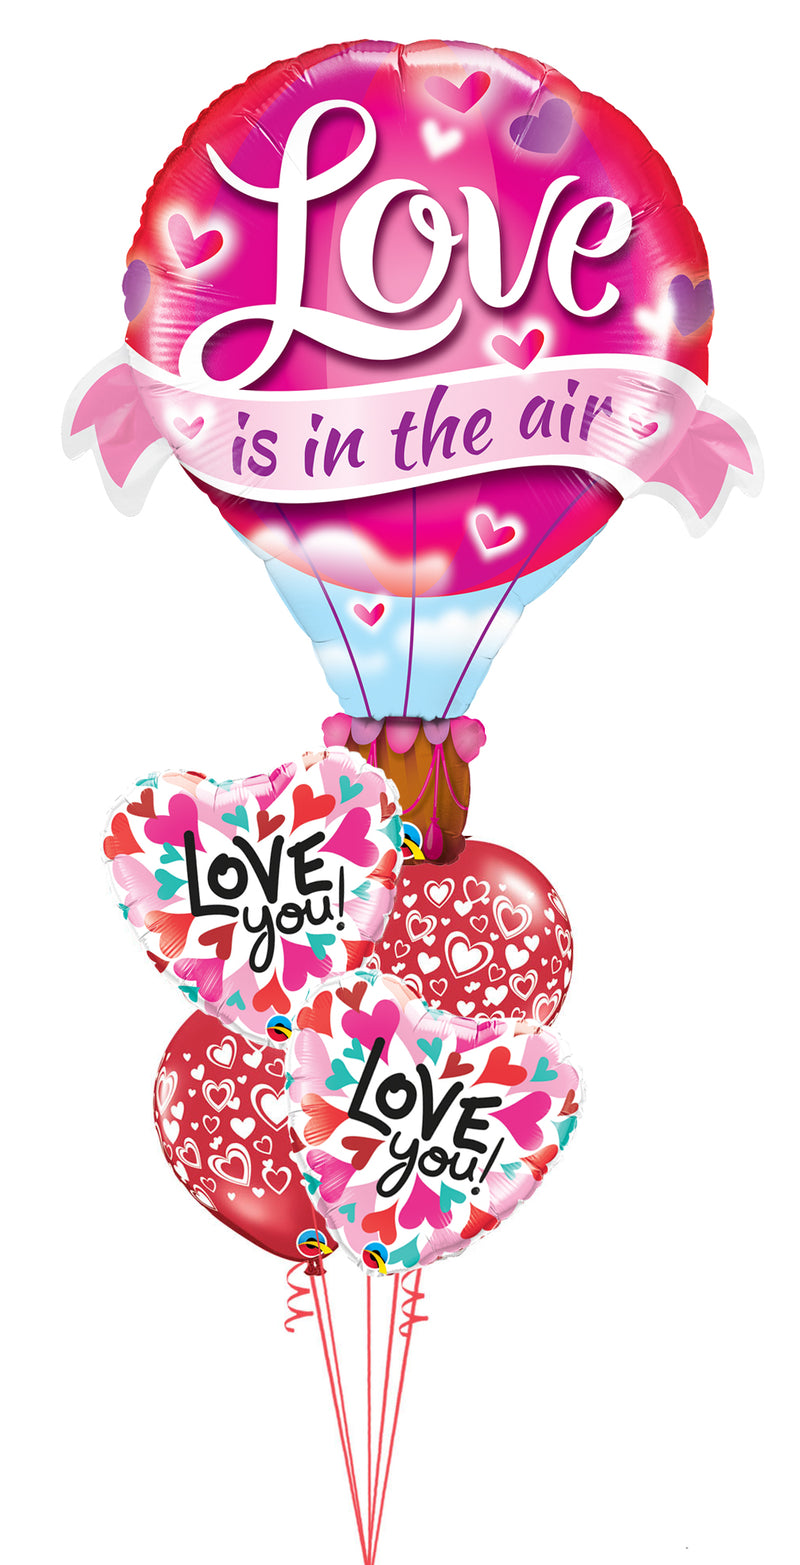 Love is on Air Balloons. With weight